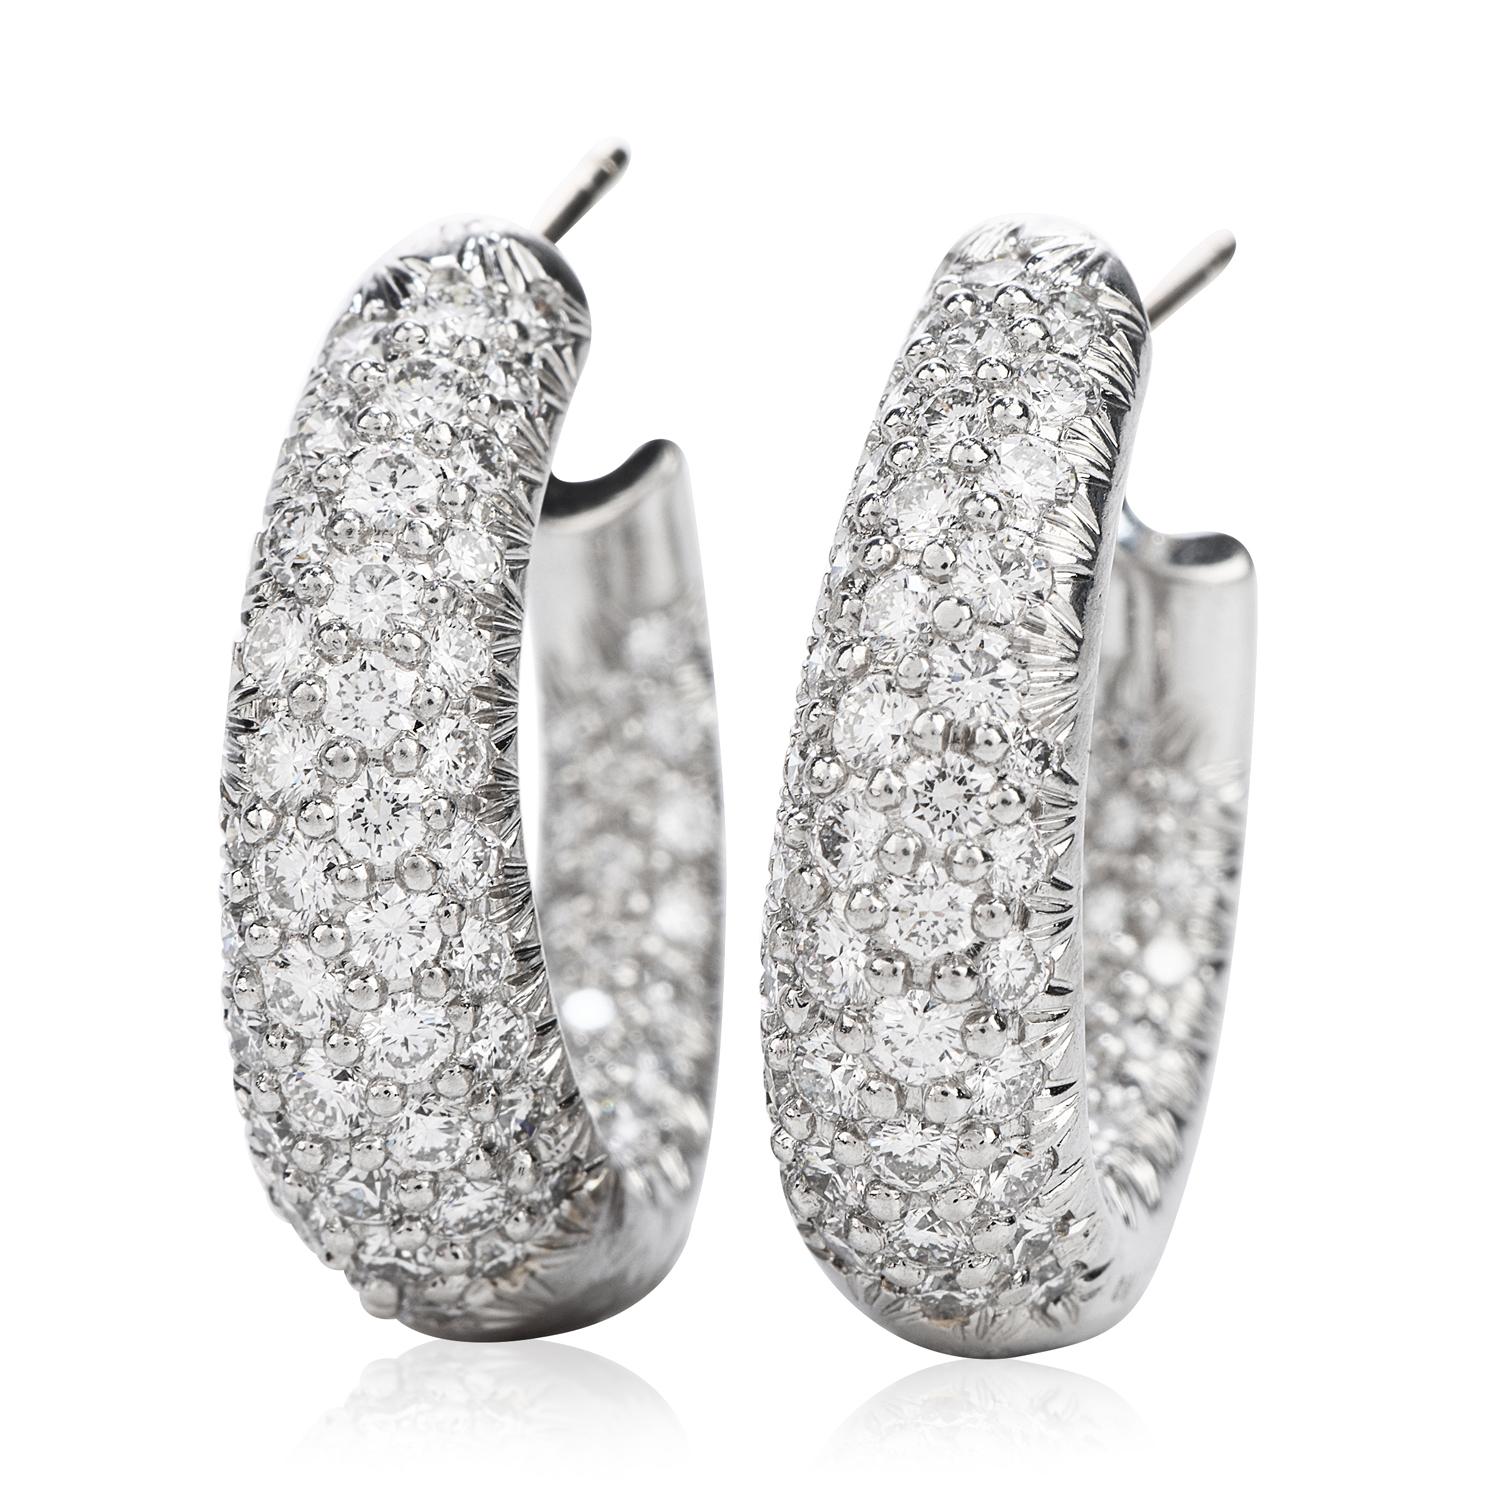 Timeless Elegance and Dazzling Sparkle, 

The Inside-Outside Design make these Platinum hoop Earrings ready to shine, 

Crafted in Solid Platinum,

with 132 Round Cut Diamonds with a total carat weight of 3.30 cts, G-H Color, VS clarity, Pave